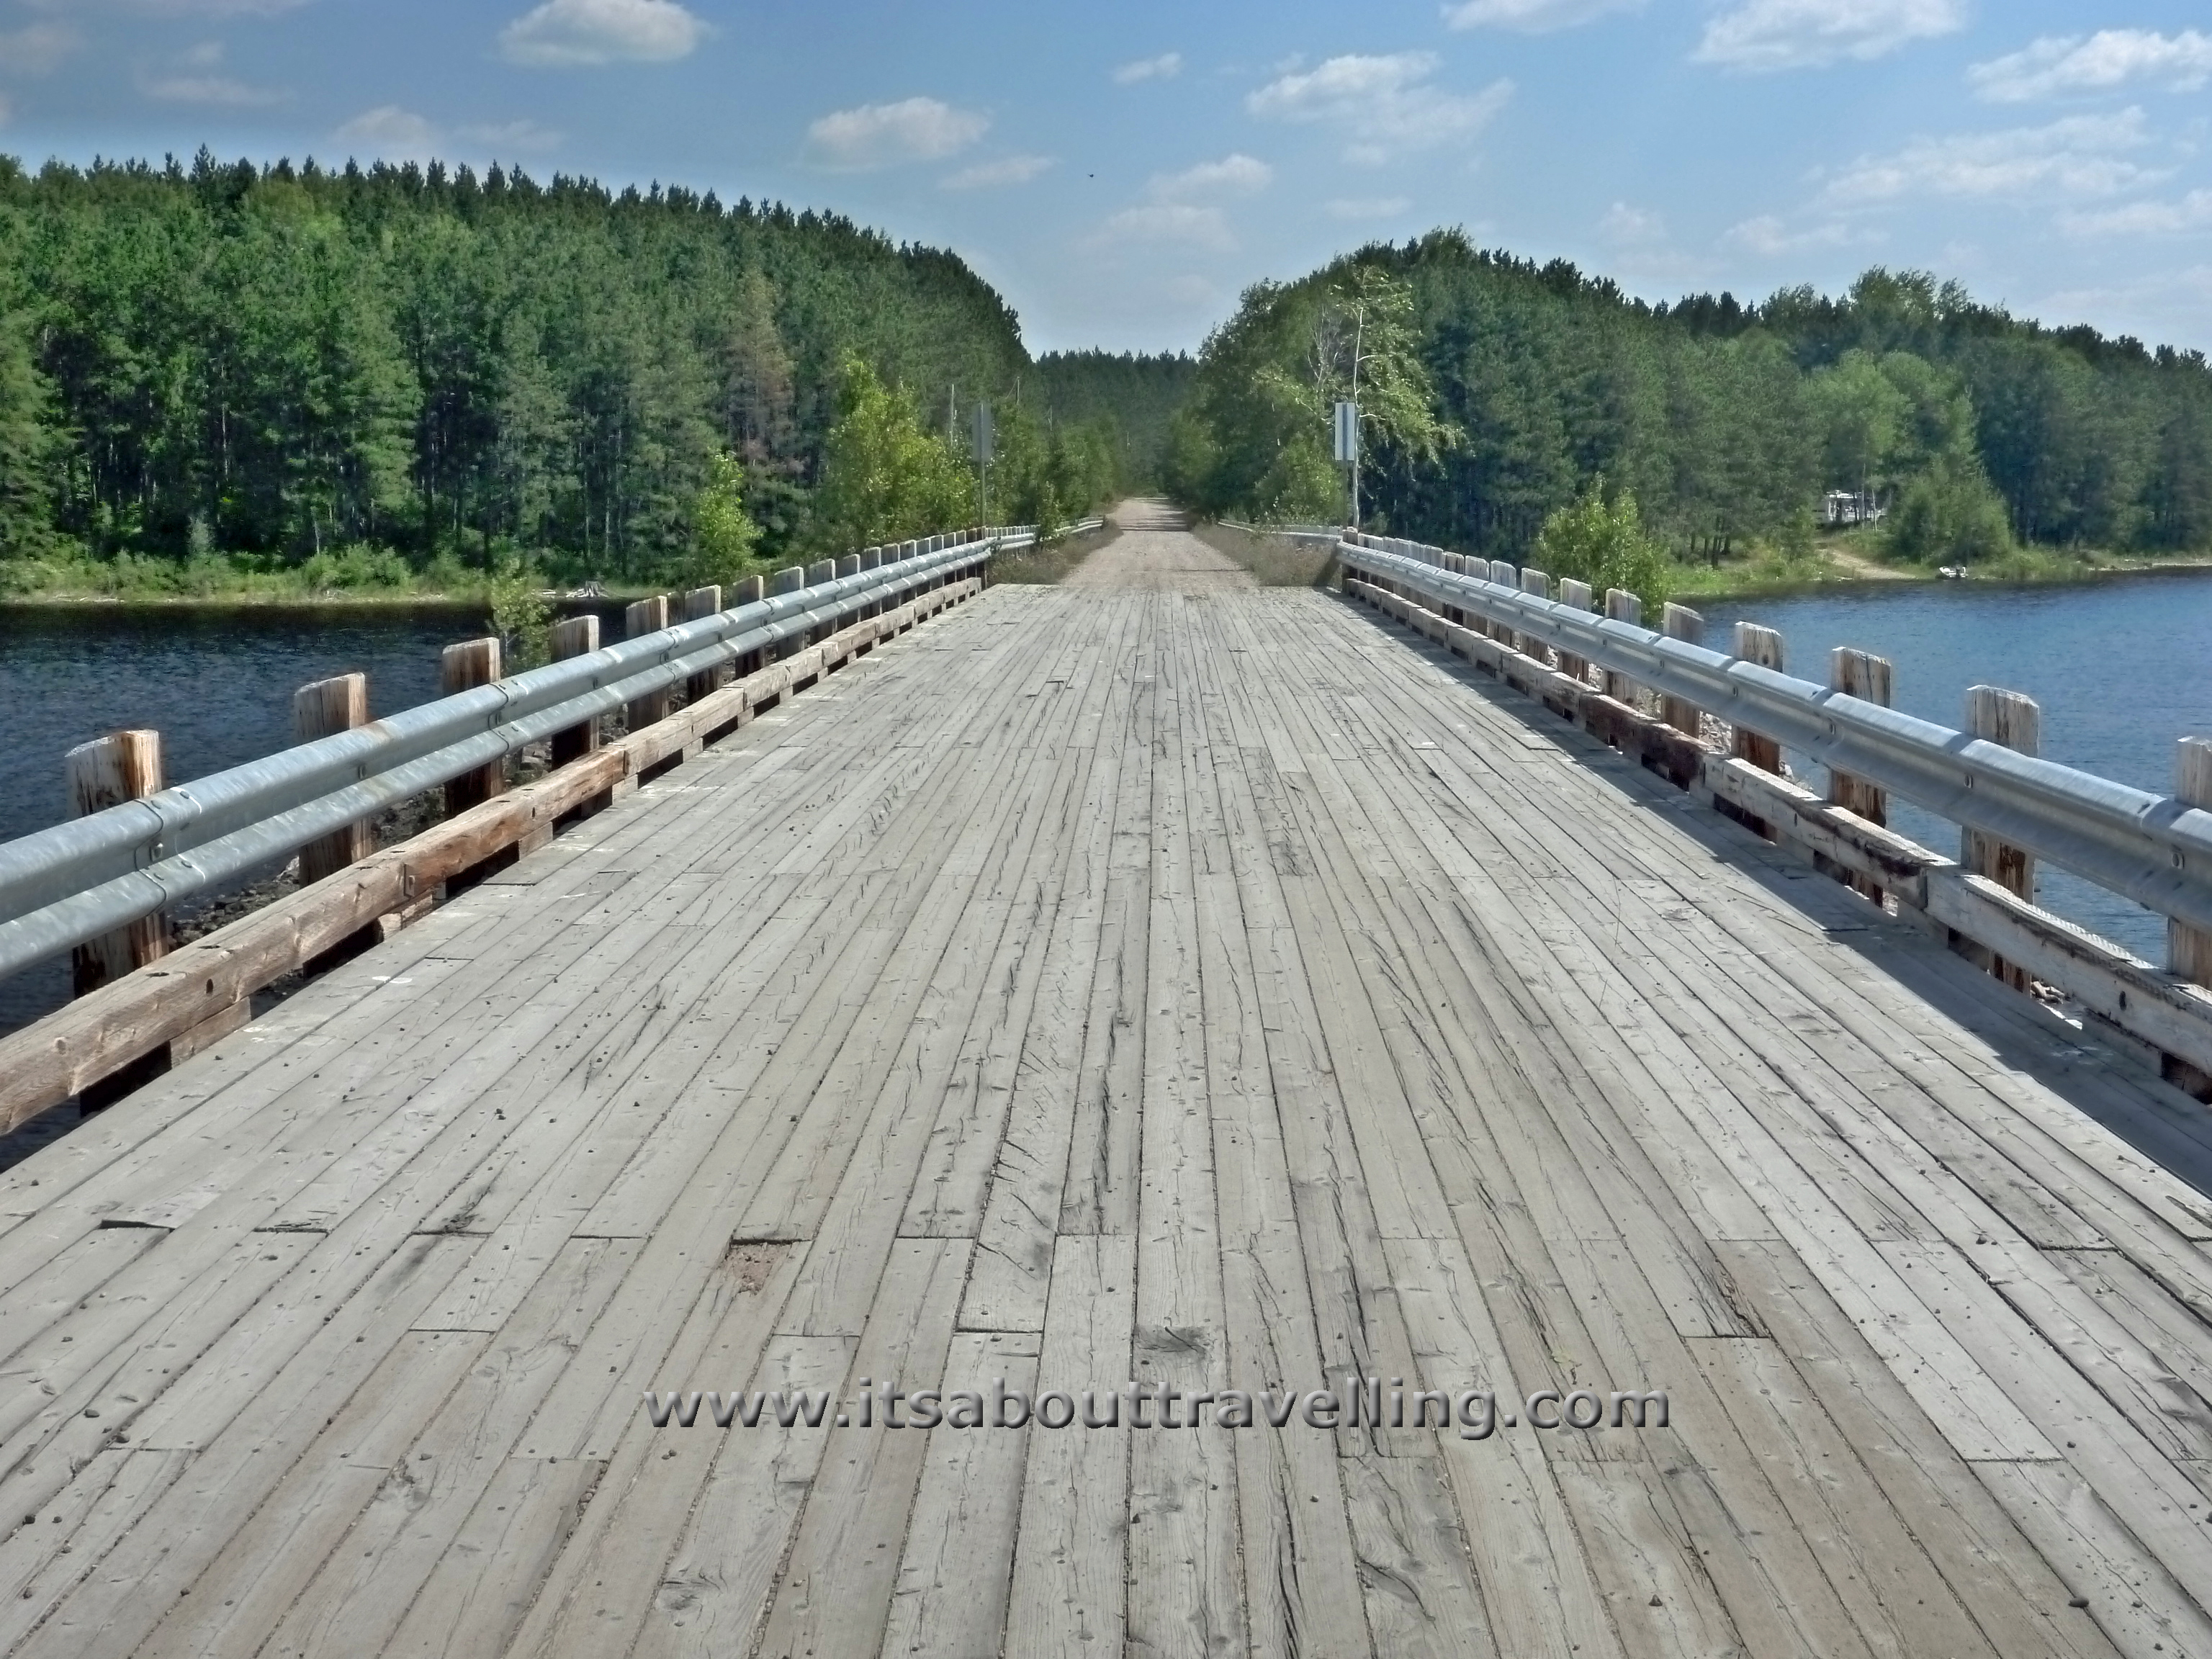 Wooden Bridge over Northern Ontario River | Pic Of The Day